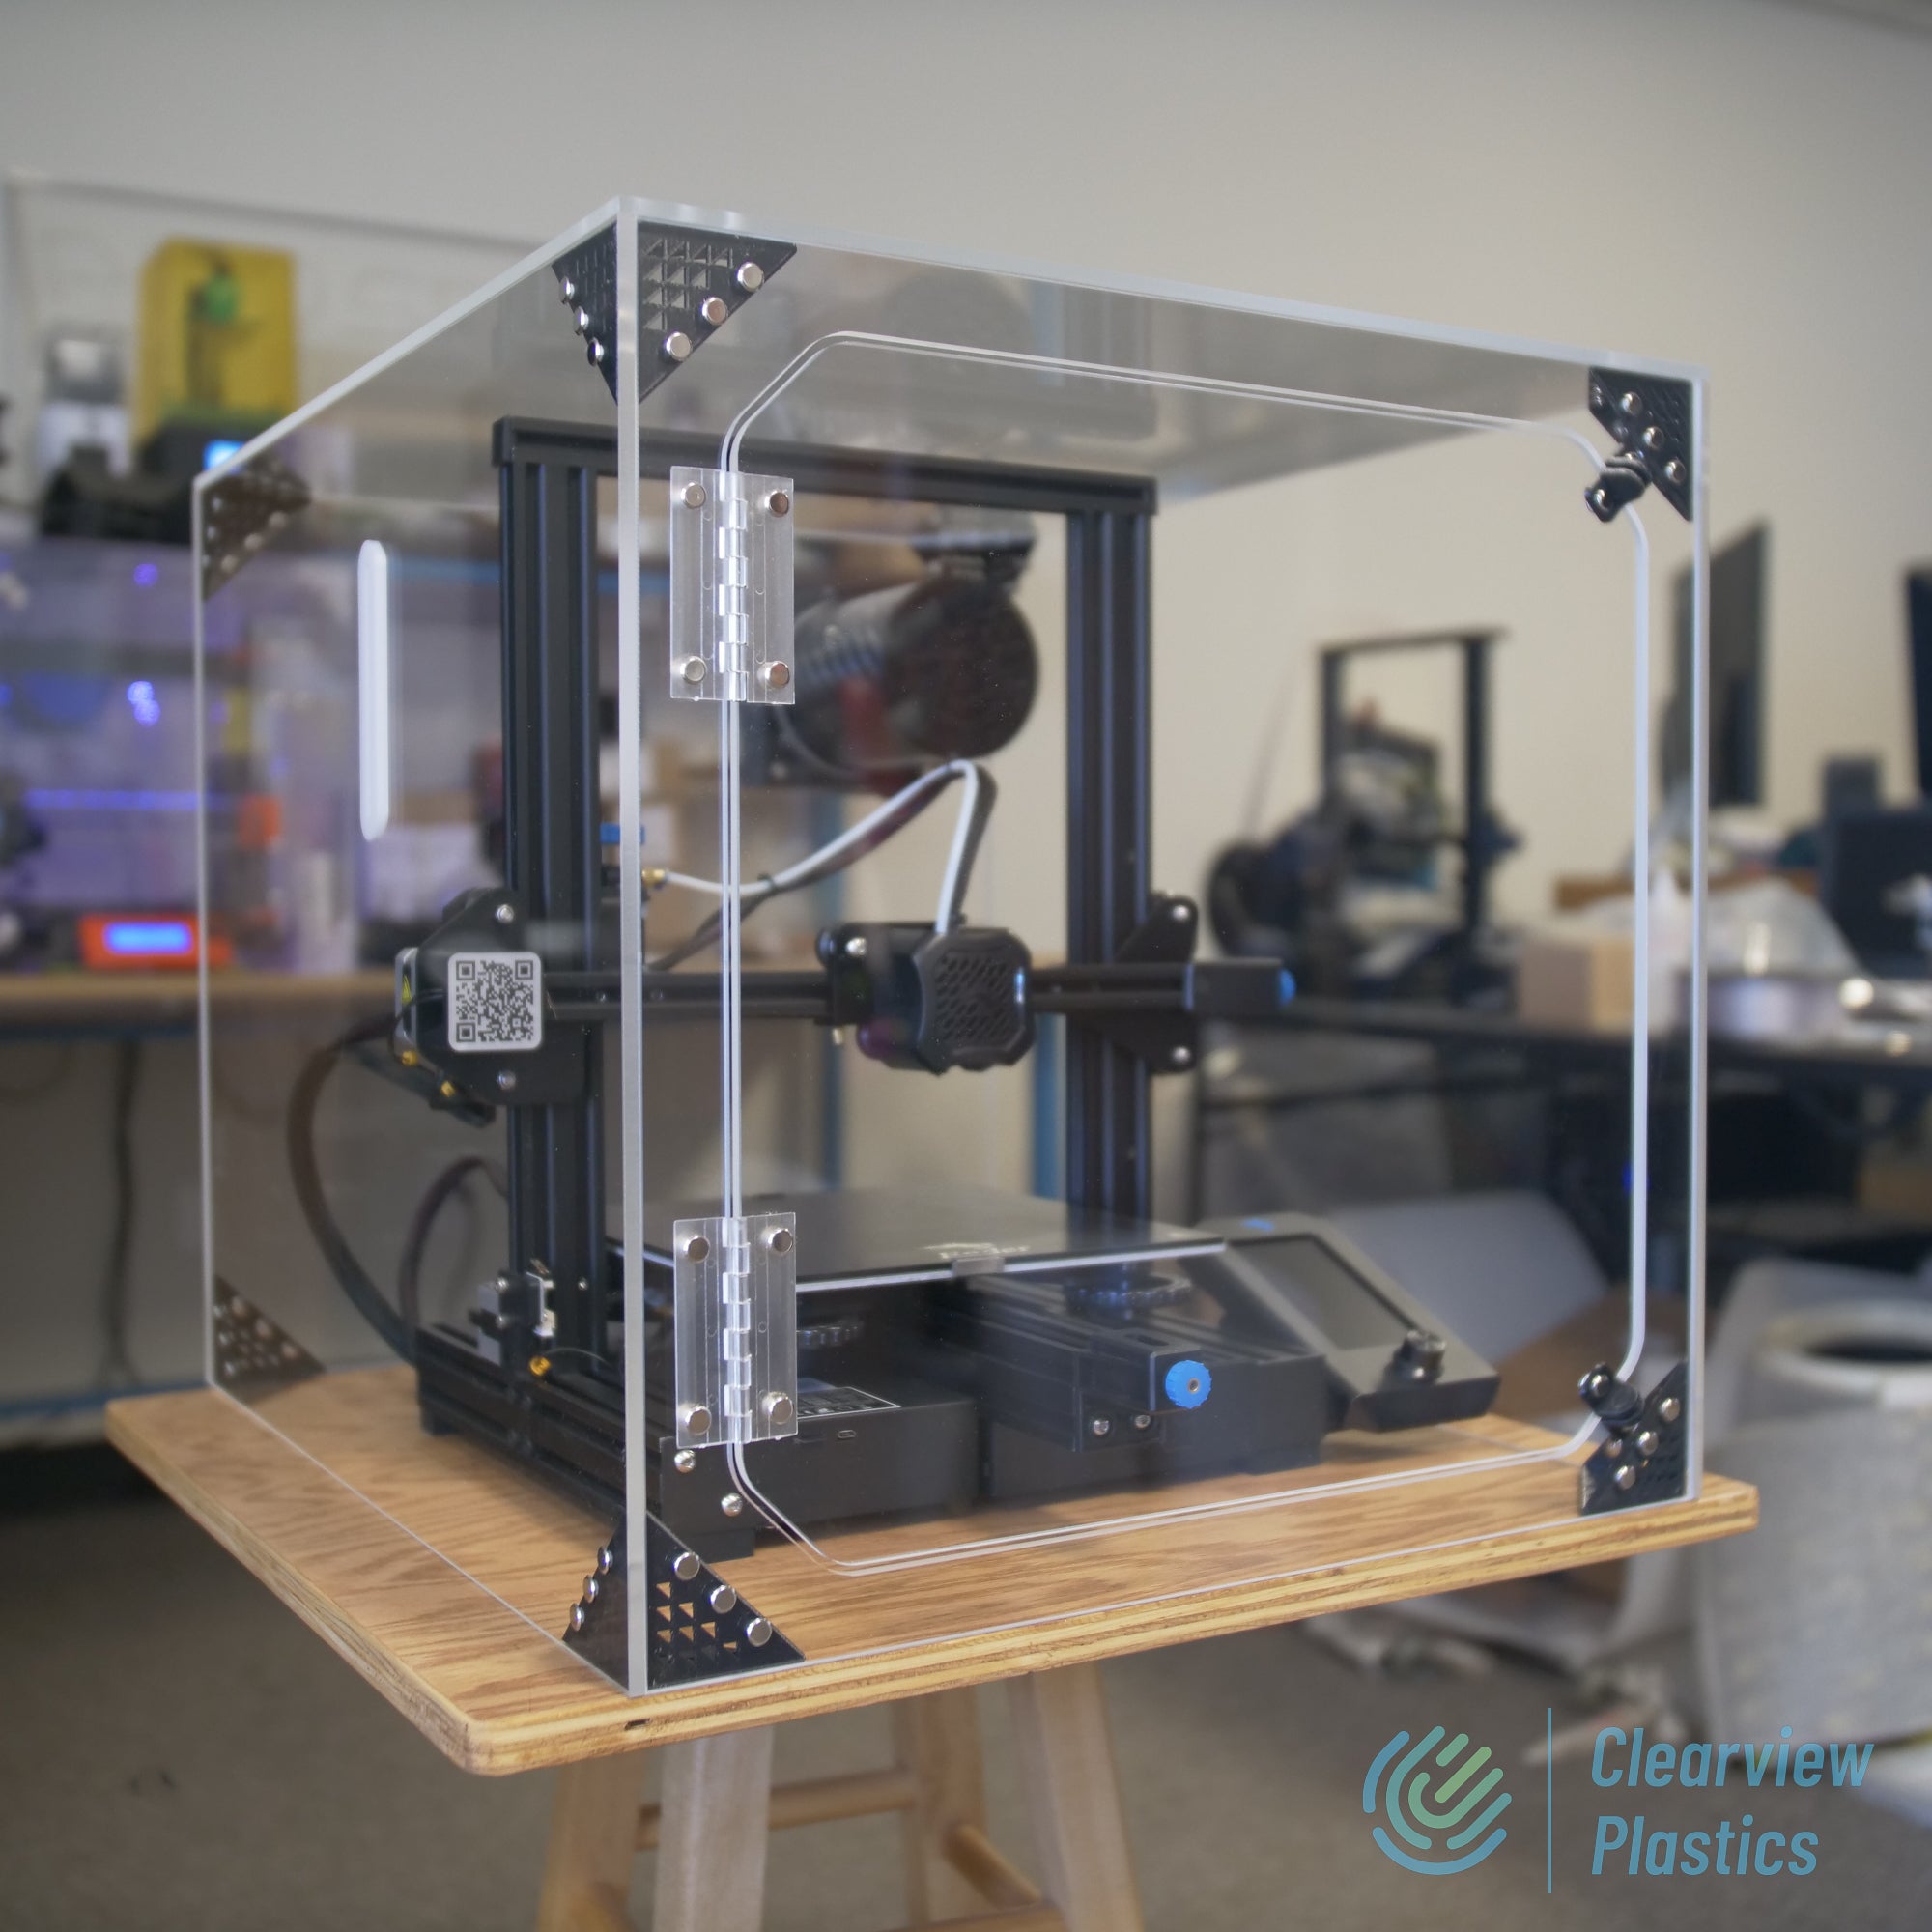 Creality 3D Printer Accessories You Should Add to Your 3D Printer